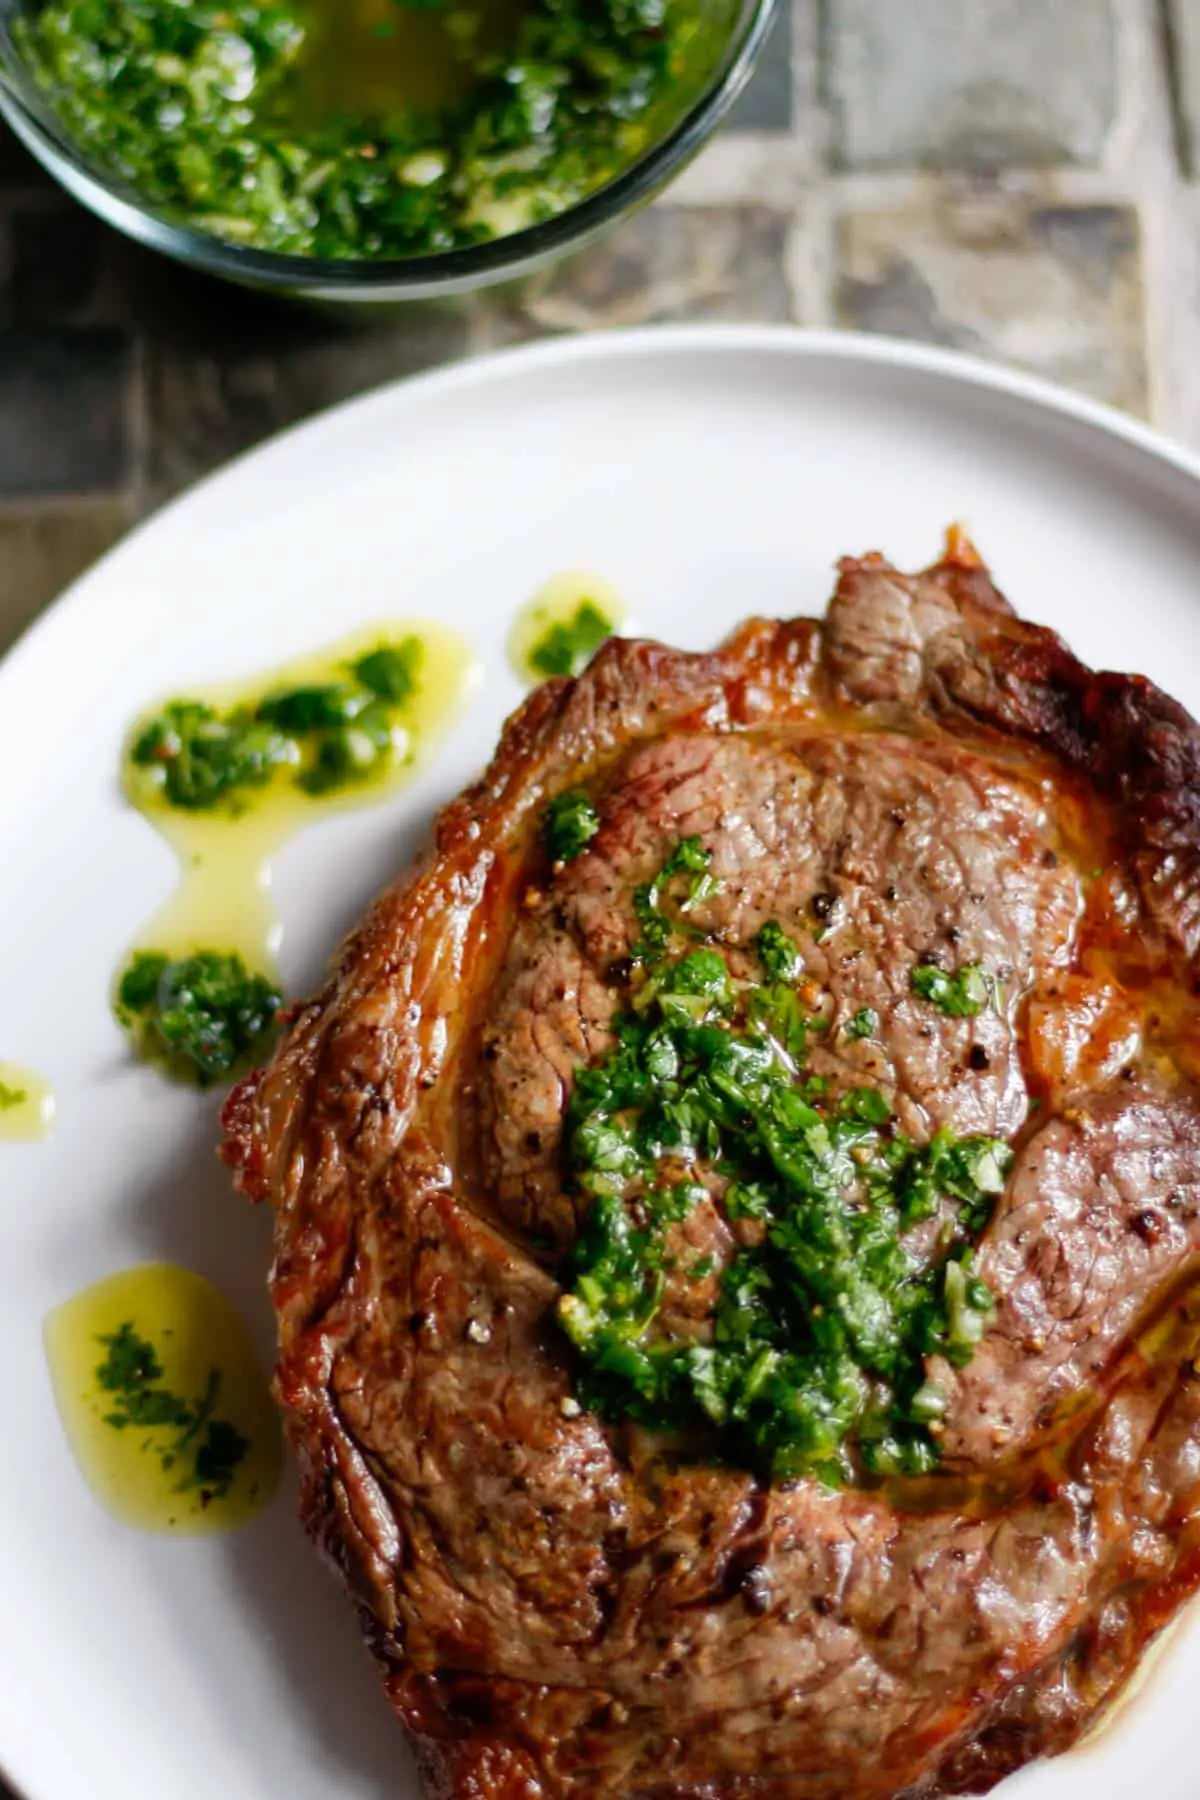 A cooked ribeye steak on a white plate which is topped with a cilantro garlic sauce and the sauce is also drizzled on the plate next to the steak with a glass bowl containing the cilantro garlic sauce in the background.